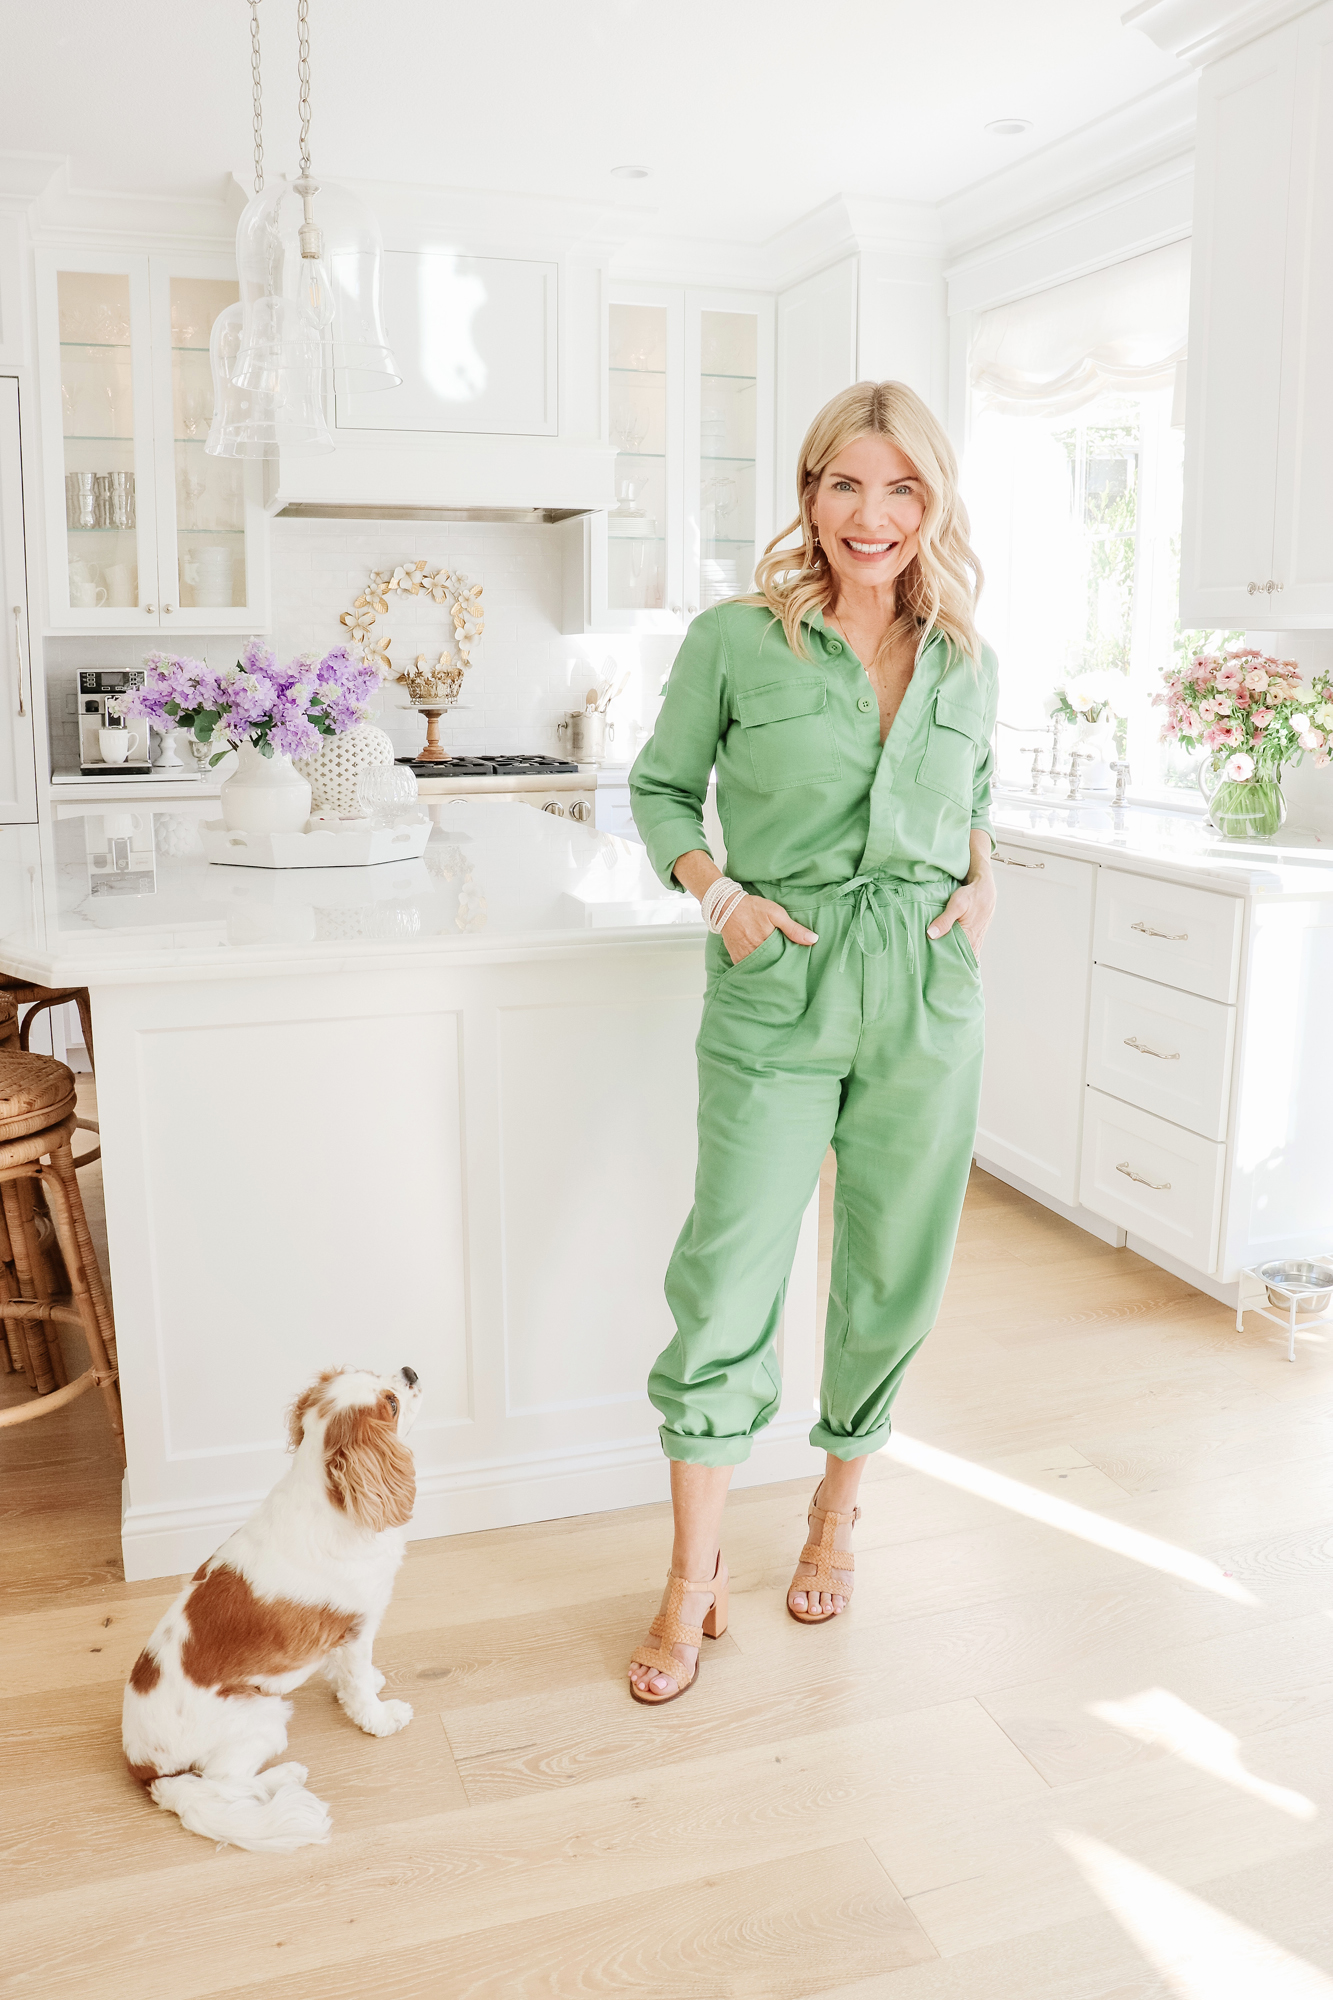 Affordable Spring Fashion under $50 - Cutest spring dresses, jumpsuits, jeans and t-shirts all perfect for Spring and Summer 2020. Rounded up my favorites!